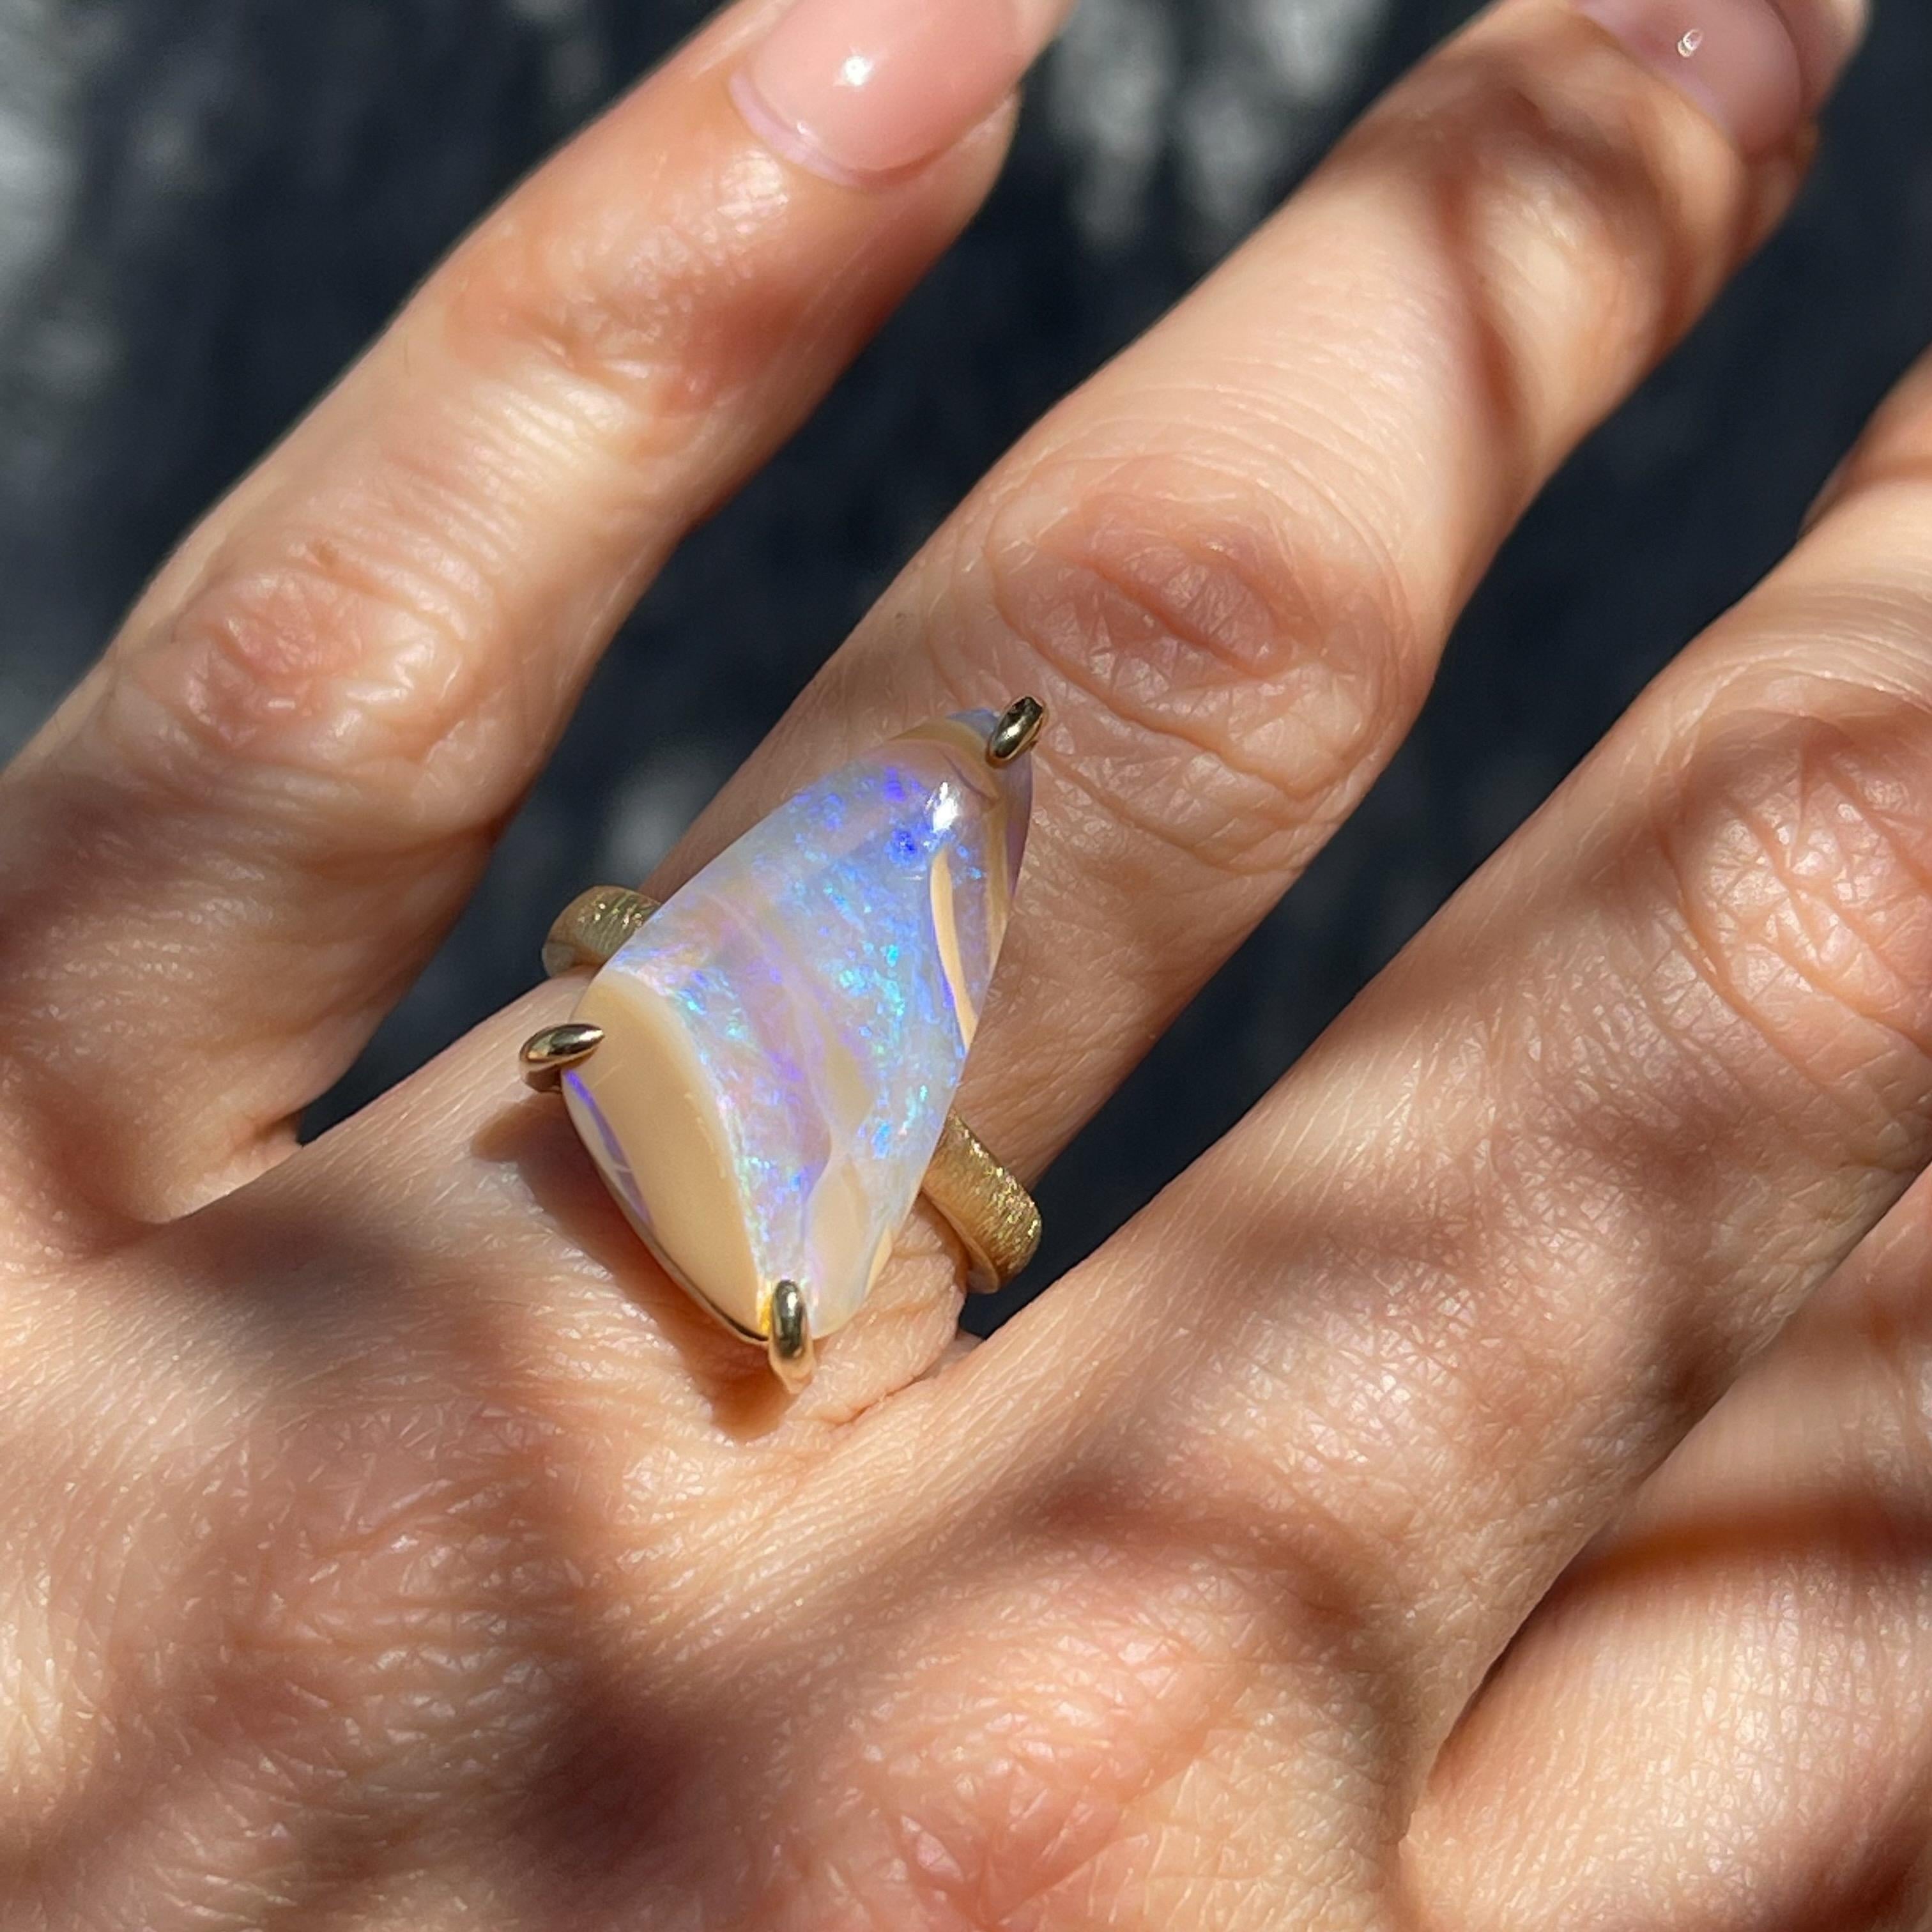 An ethereal crystal opal streams pastel hues in the Passage of Time Australian Opal Ring. Its base glows soothing lavender, while green and turquoise embers flicker on top, and caramel ribbons unfurl within. The movement of hues and their